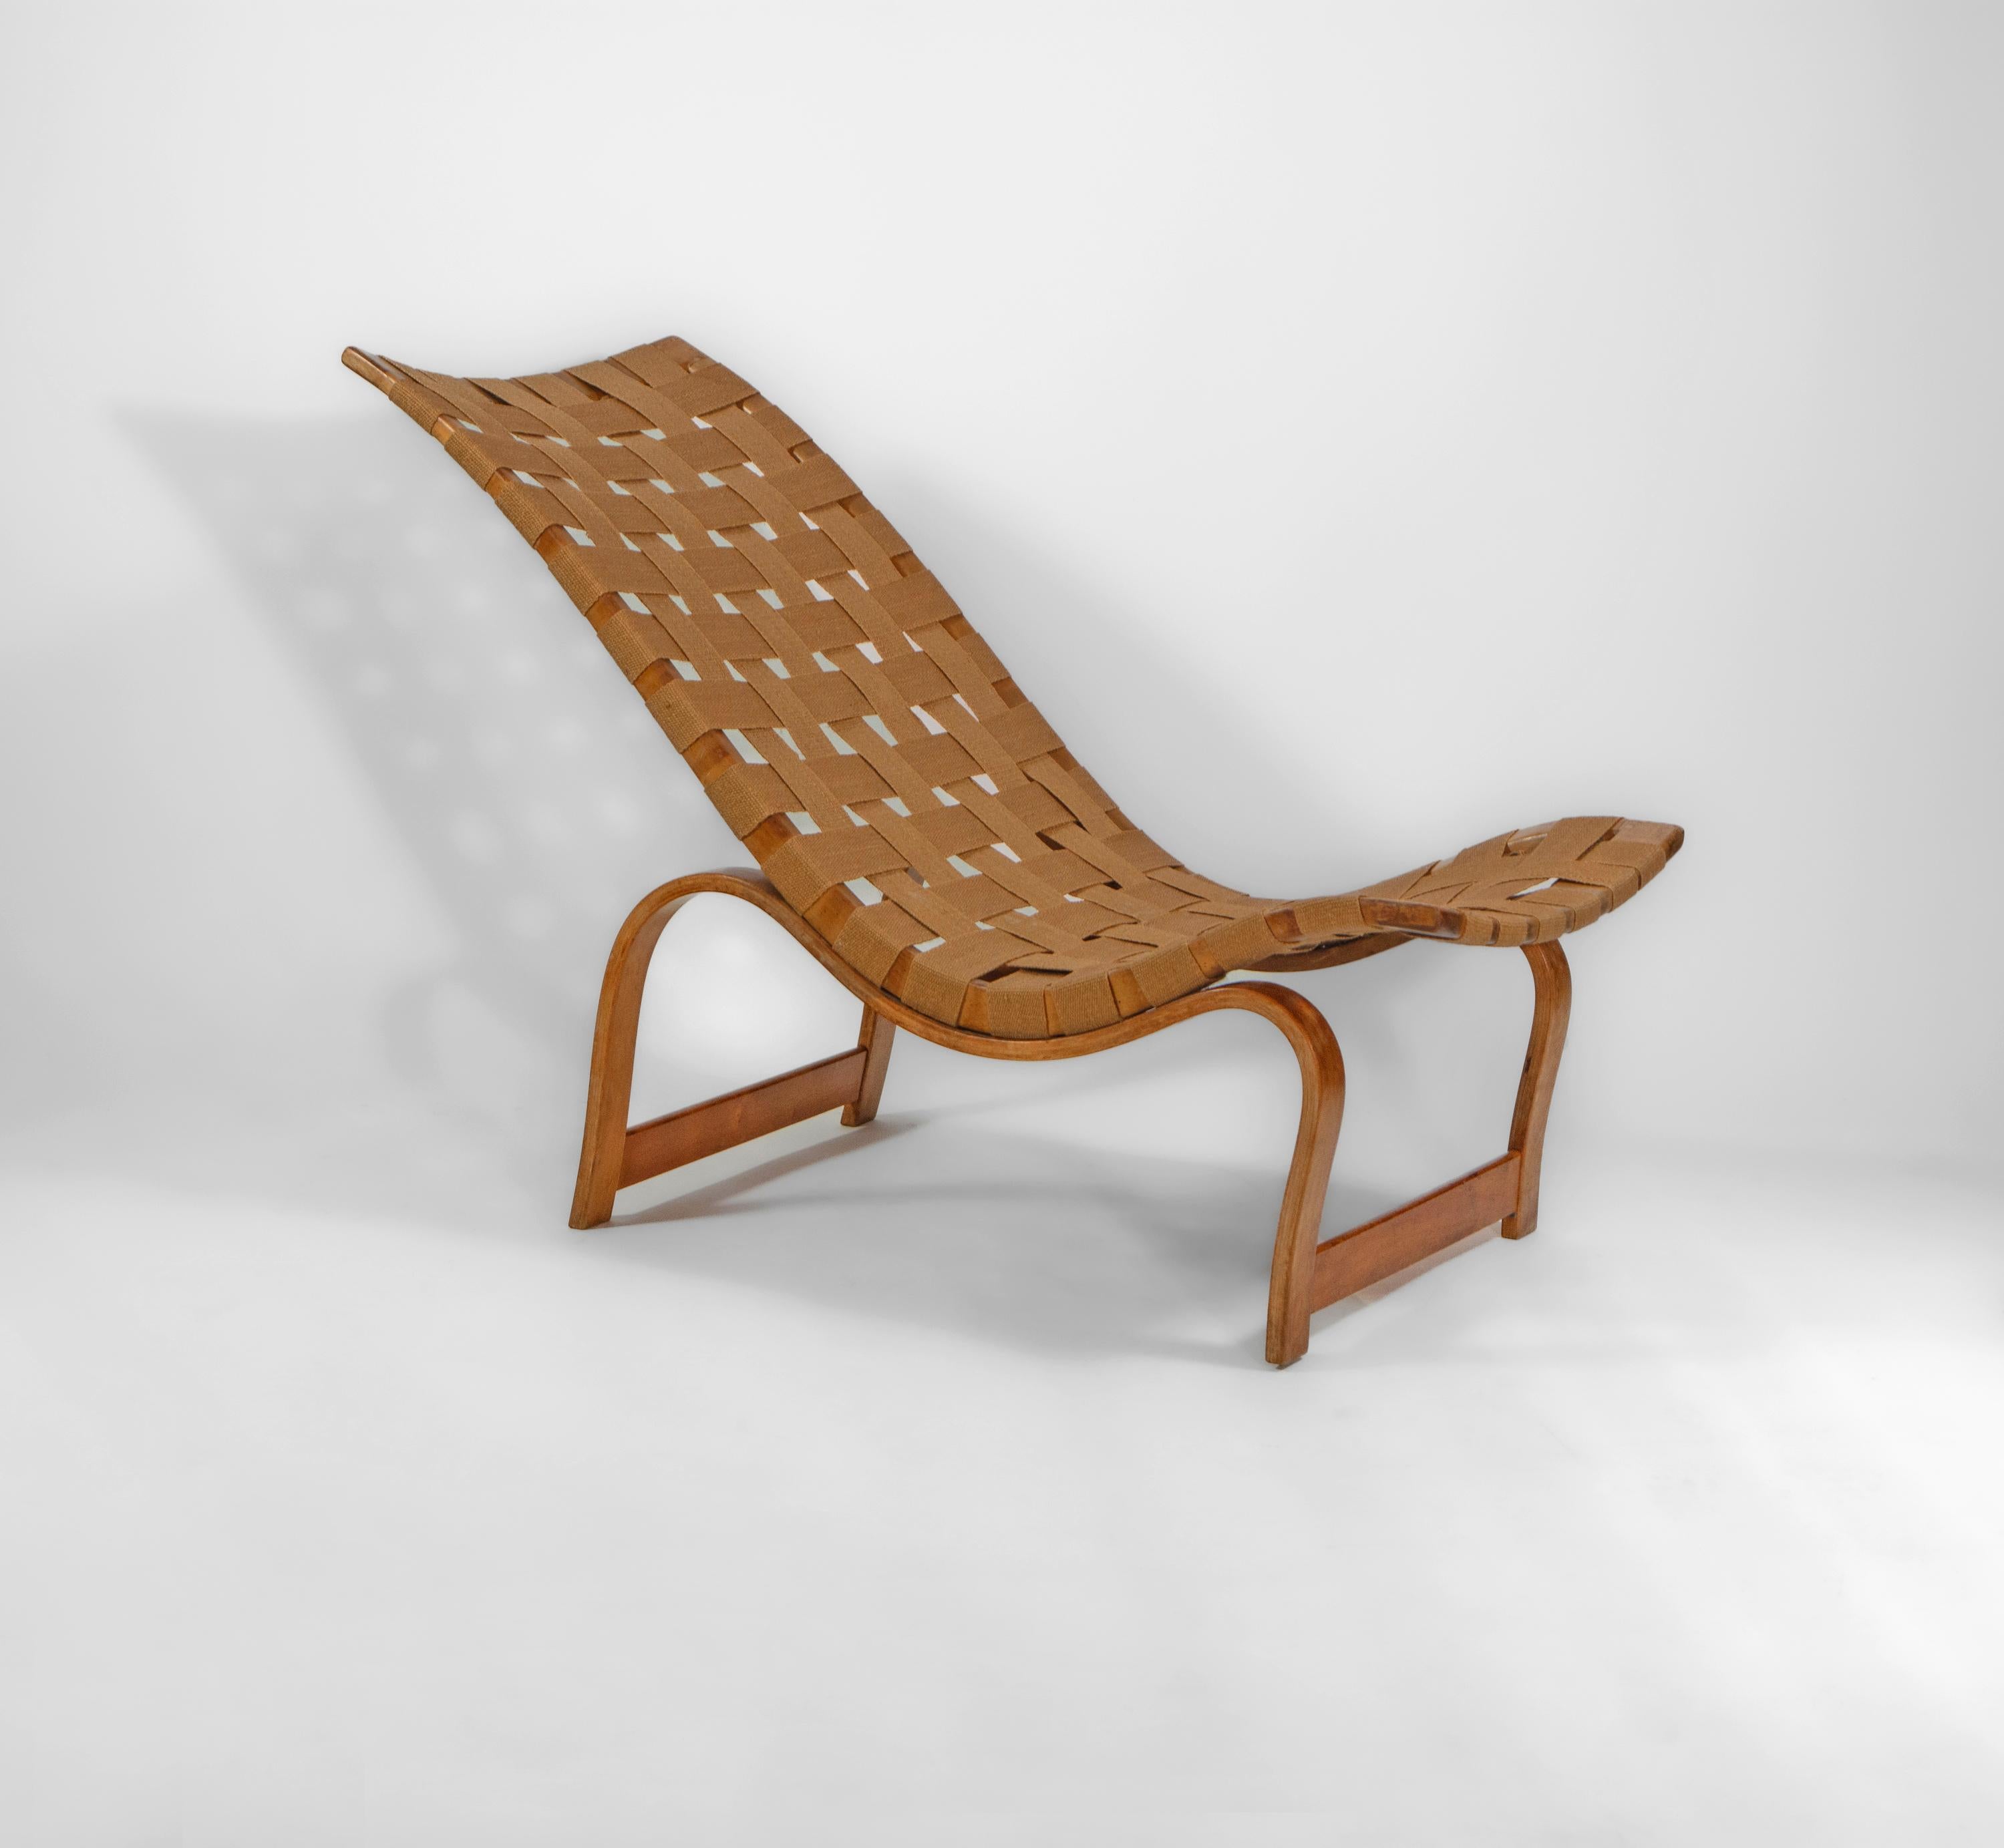 A rare easy 'resting' chair, model 36 by Swedish architect and designer Bruno Mathsson for Karl Mathsson. Circa 1940's. Labelled.

One of Bruno Mathsson's first concepts which was designed in 1936, and manufactured from around 1939. This model dates